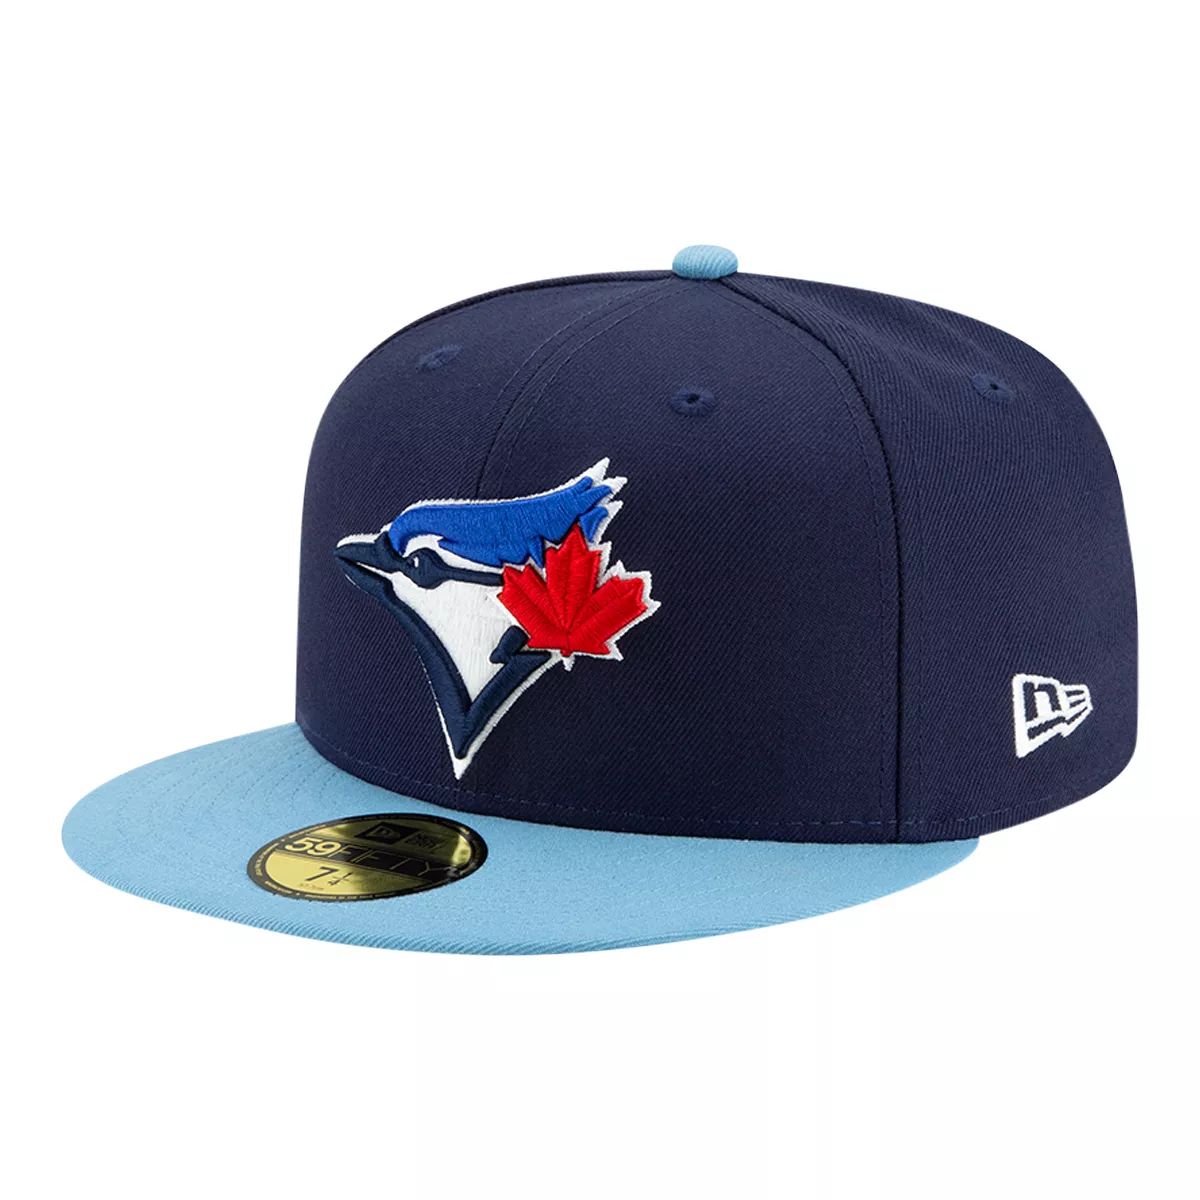  Youth Small Toronto Blue Jays Custom (Any Name/#) Full Button  Licensed Replica MLB Jersey : Clothing, Shoes & Jewelry